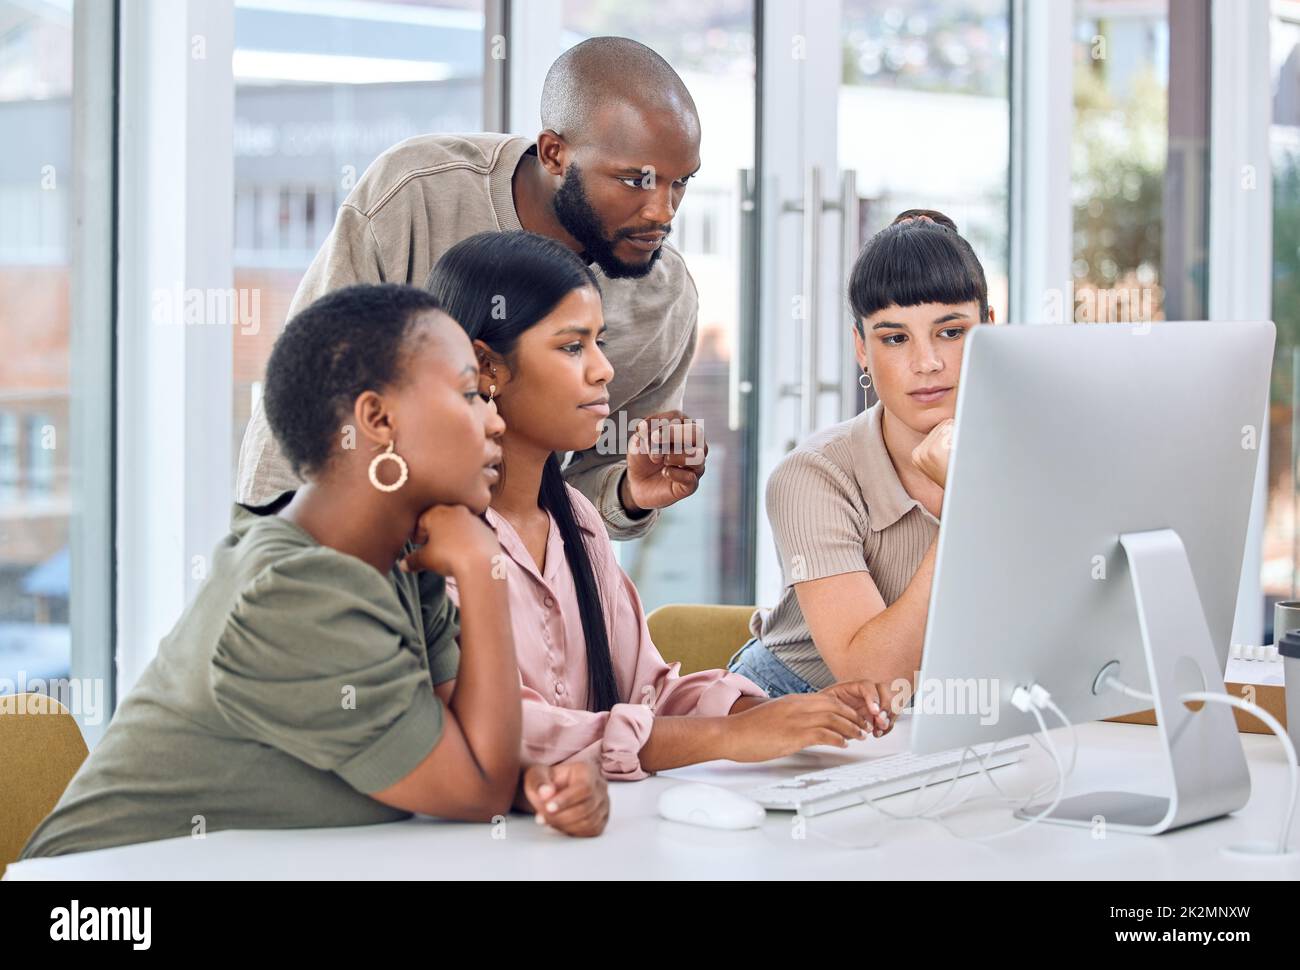 Everyone is striving towards one unified goal. Shot of a group of businesspeople discussing something on a desktop. Stock Photo